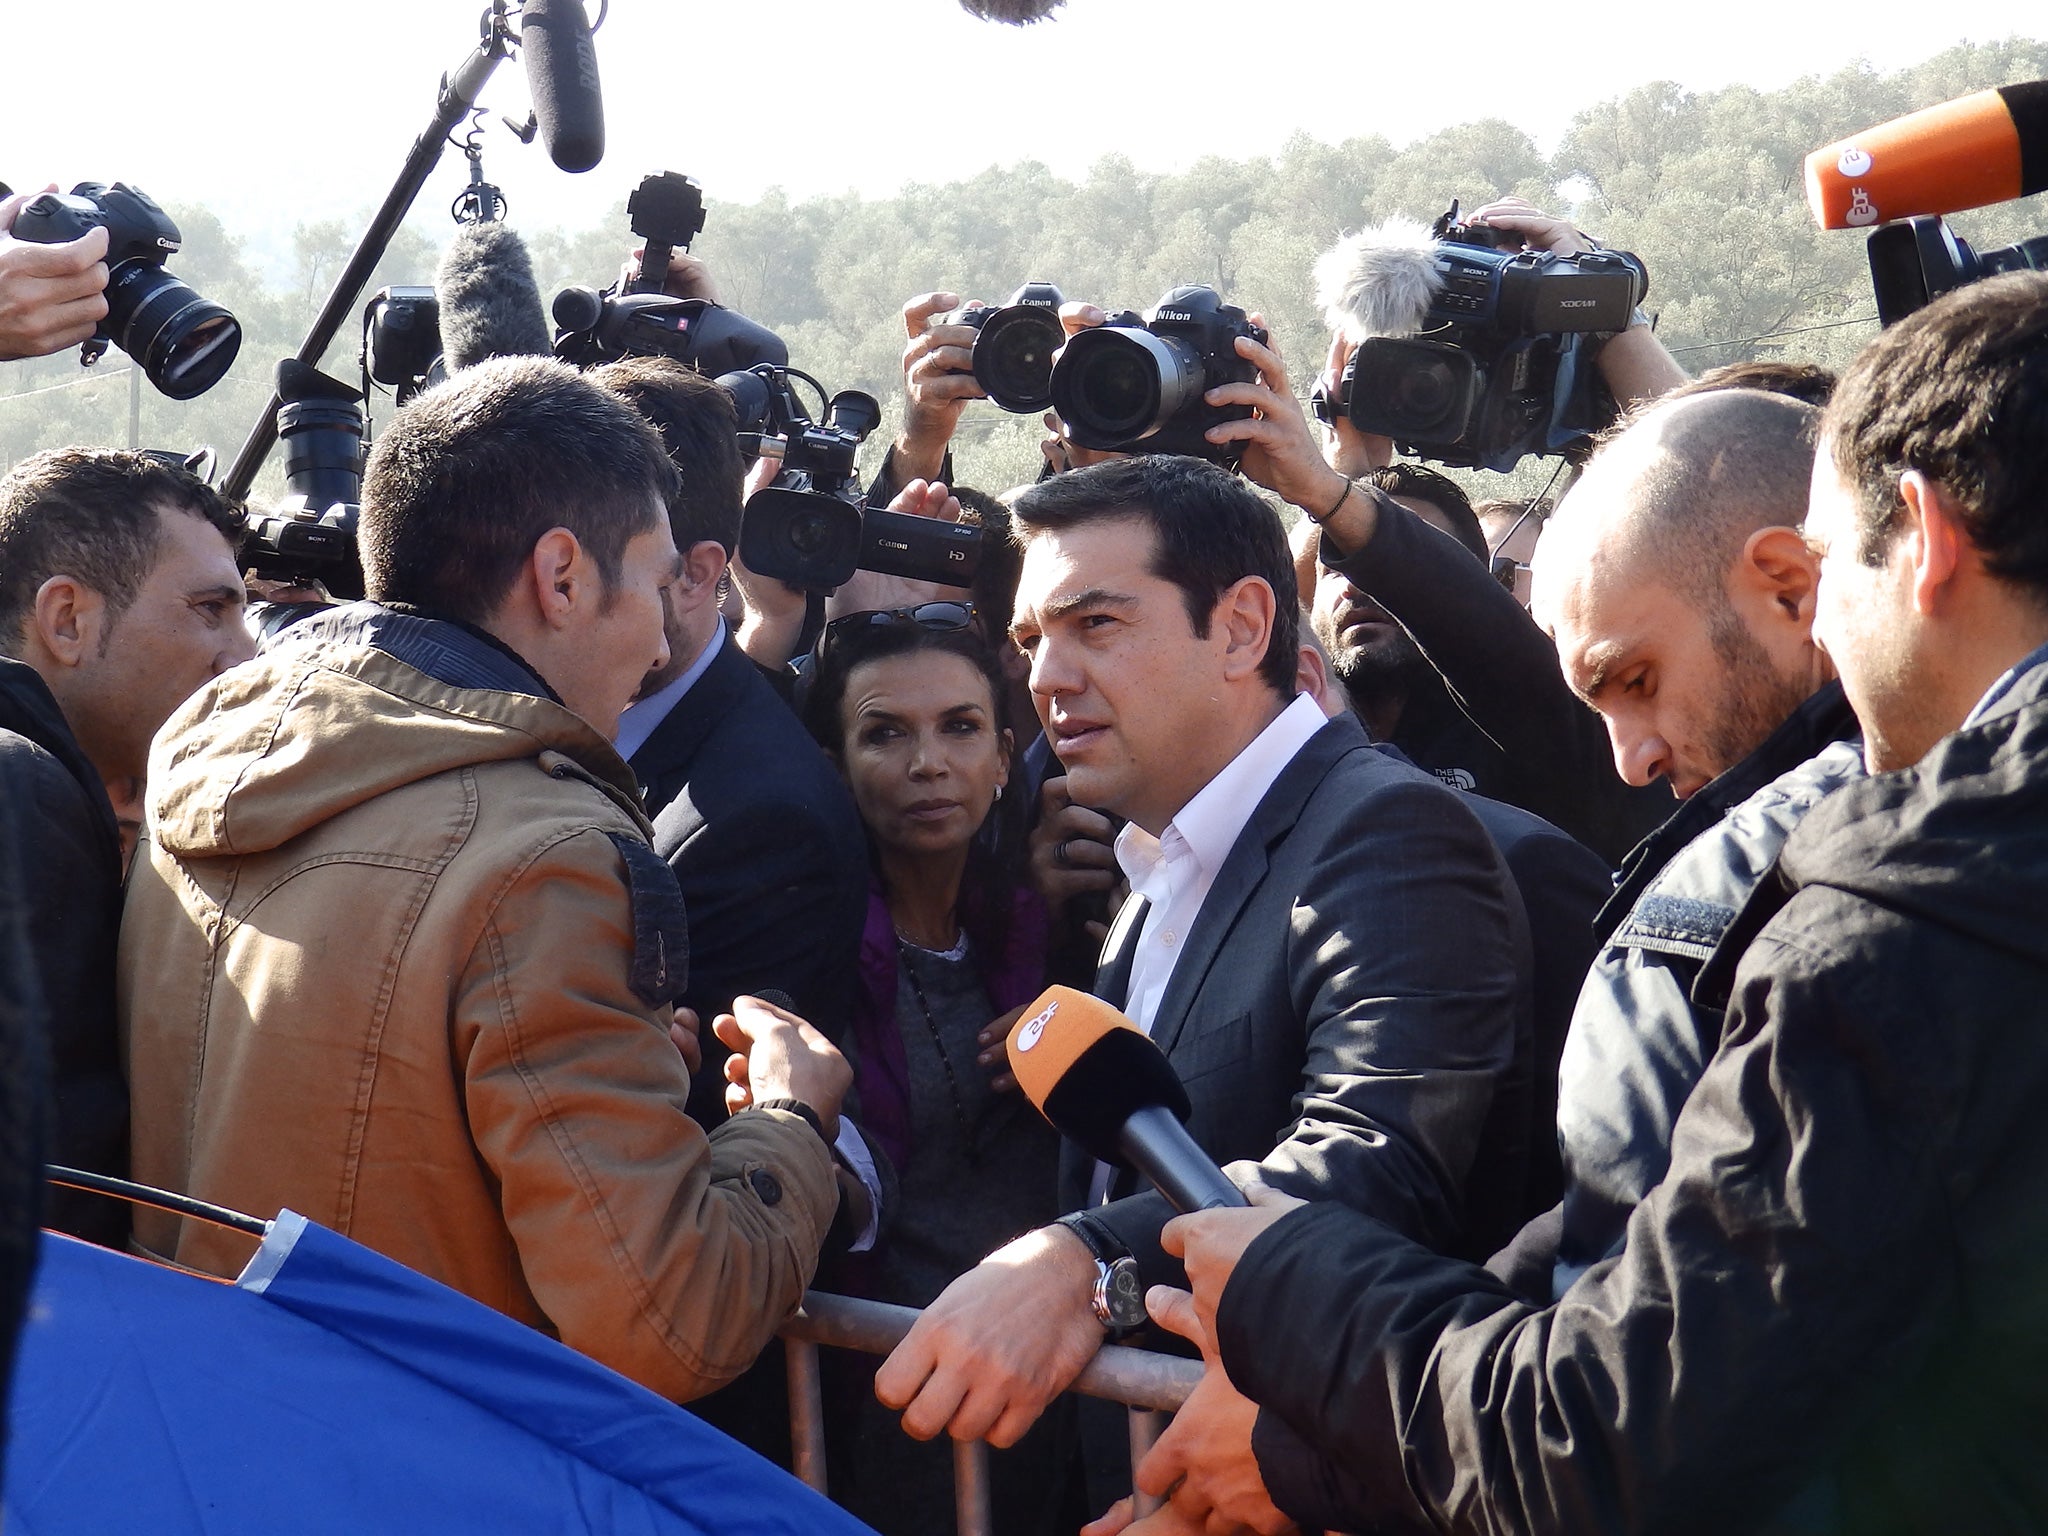 Alexis Tsipras is questioned by an asylum seeker during his tour of the Moria camp